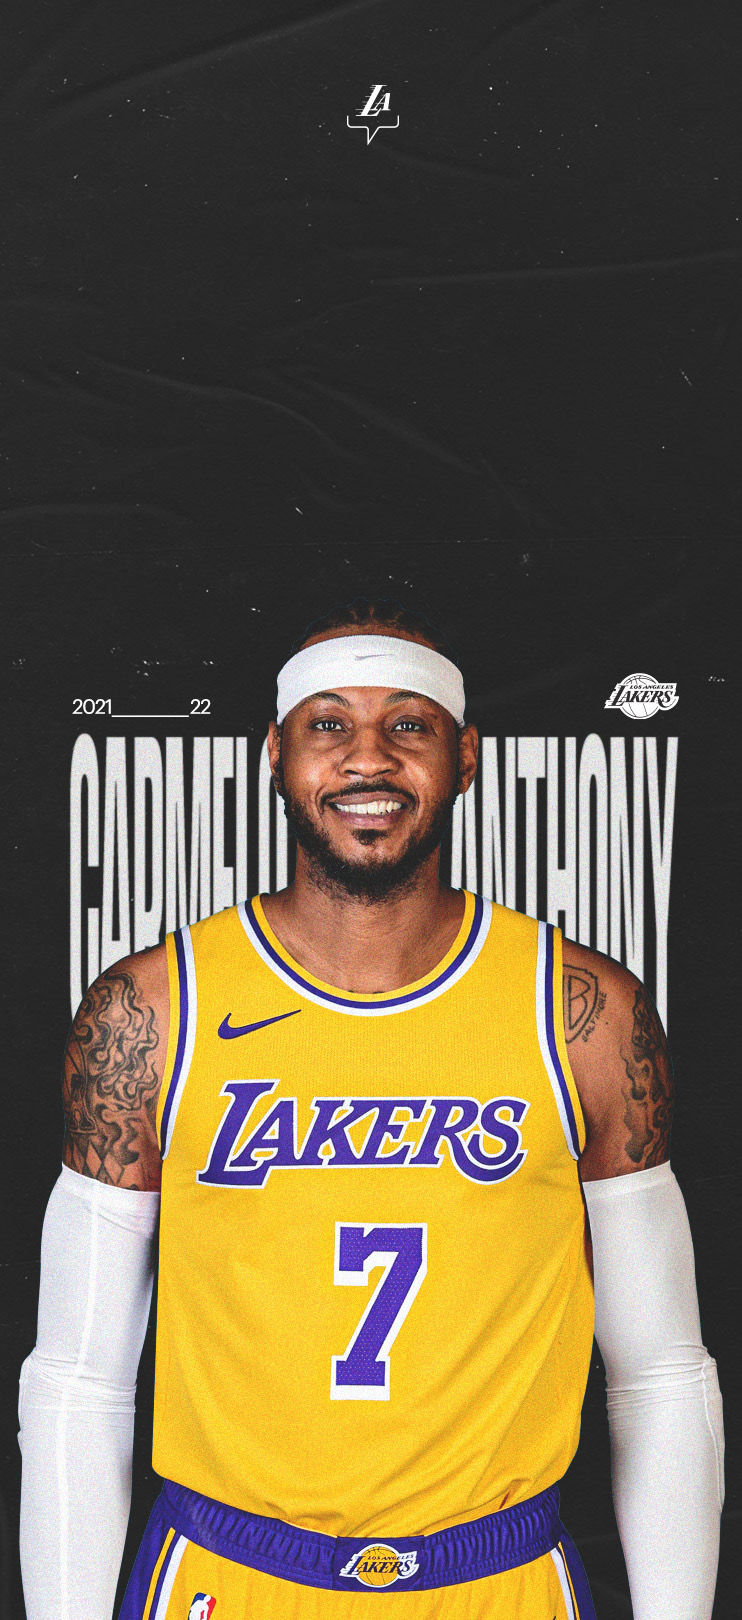 Carmelo Anthony (@carmeloanthony) will wear No. 7 for the #Lakers. : r/ lakers